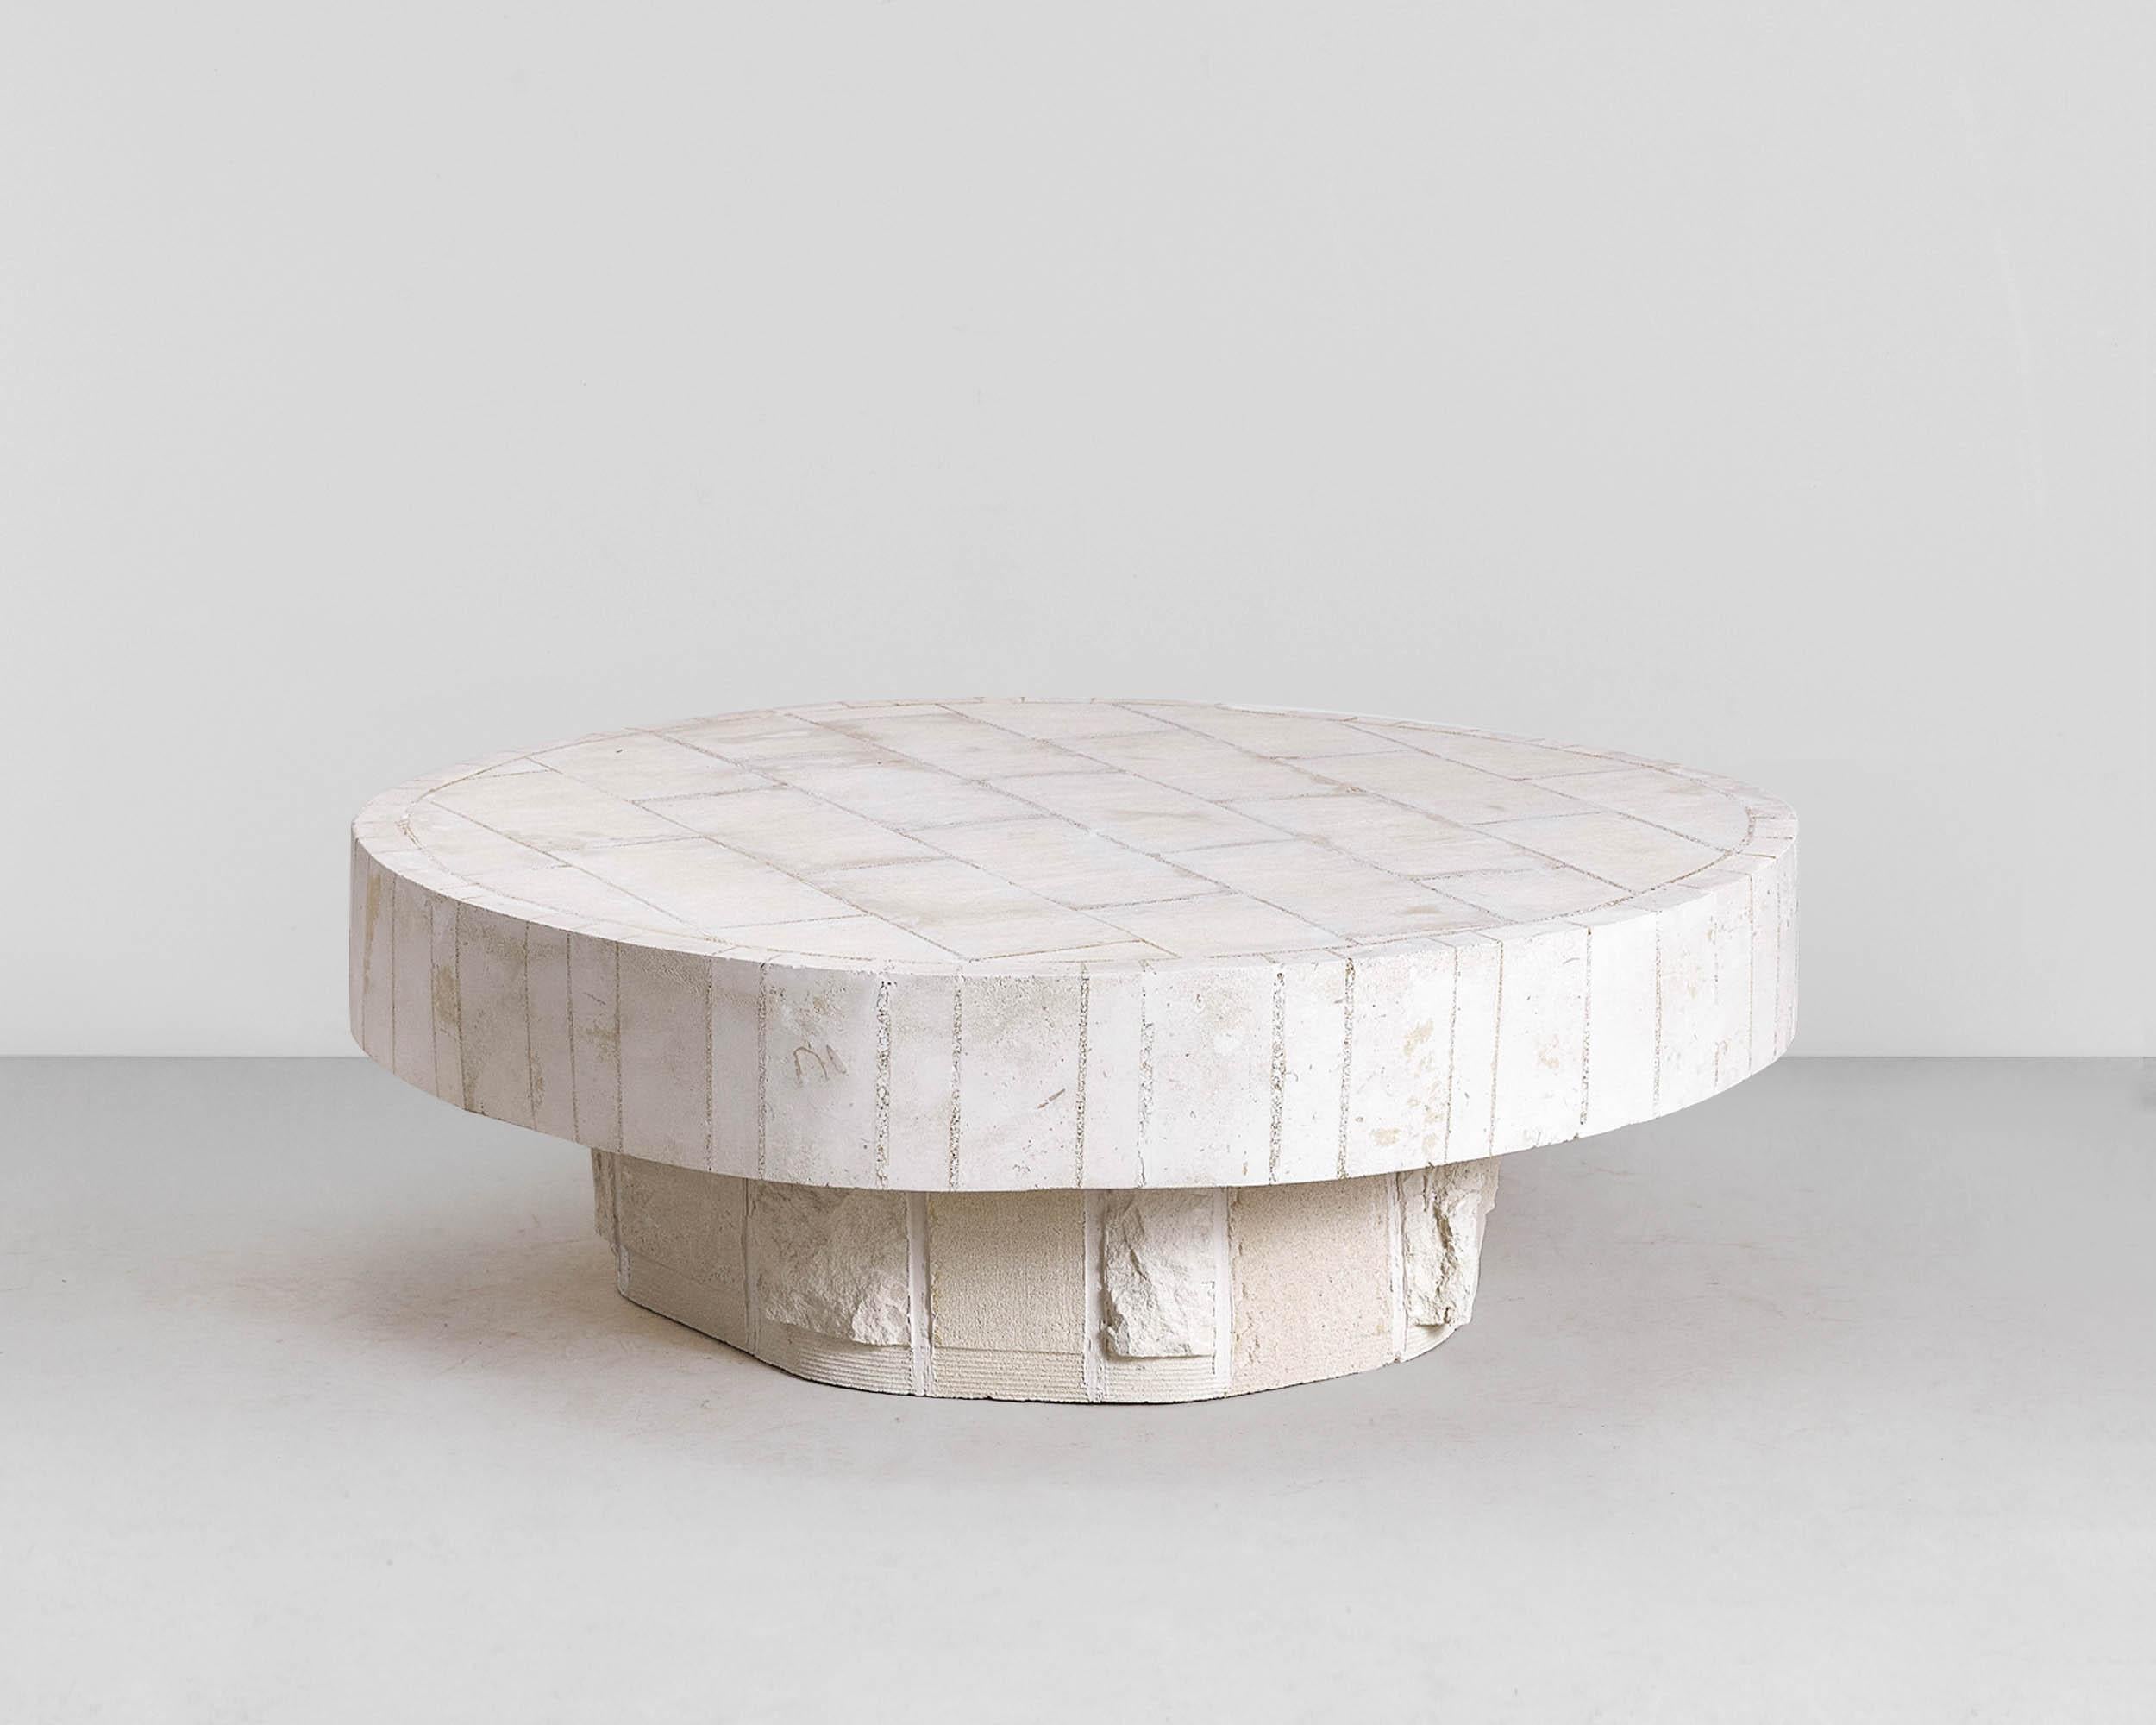 Contemporary coffee table 'Hendo' by denHolm.

Each creation is unique and signed by the artist.

Dimensions:
H. 40 cm
D. 100 cm

Material:
South Australian Limestone, sculpted entirely by hand.
---
Artist and stonemason Steve Clark is the man